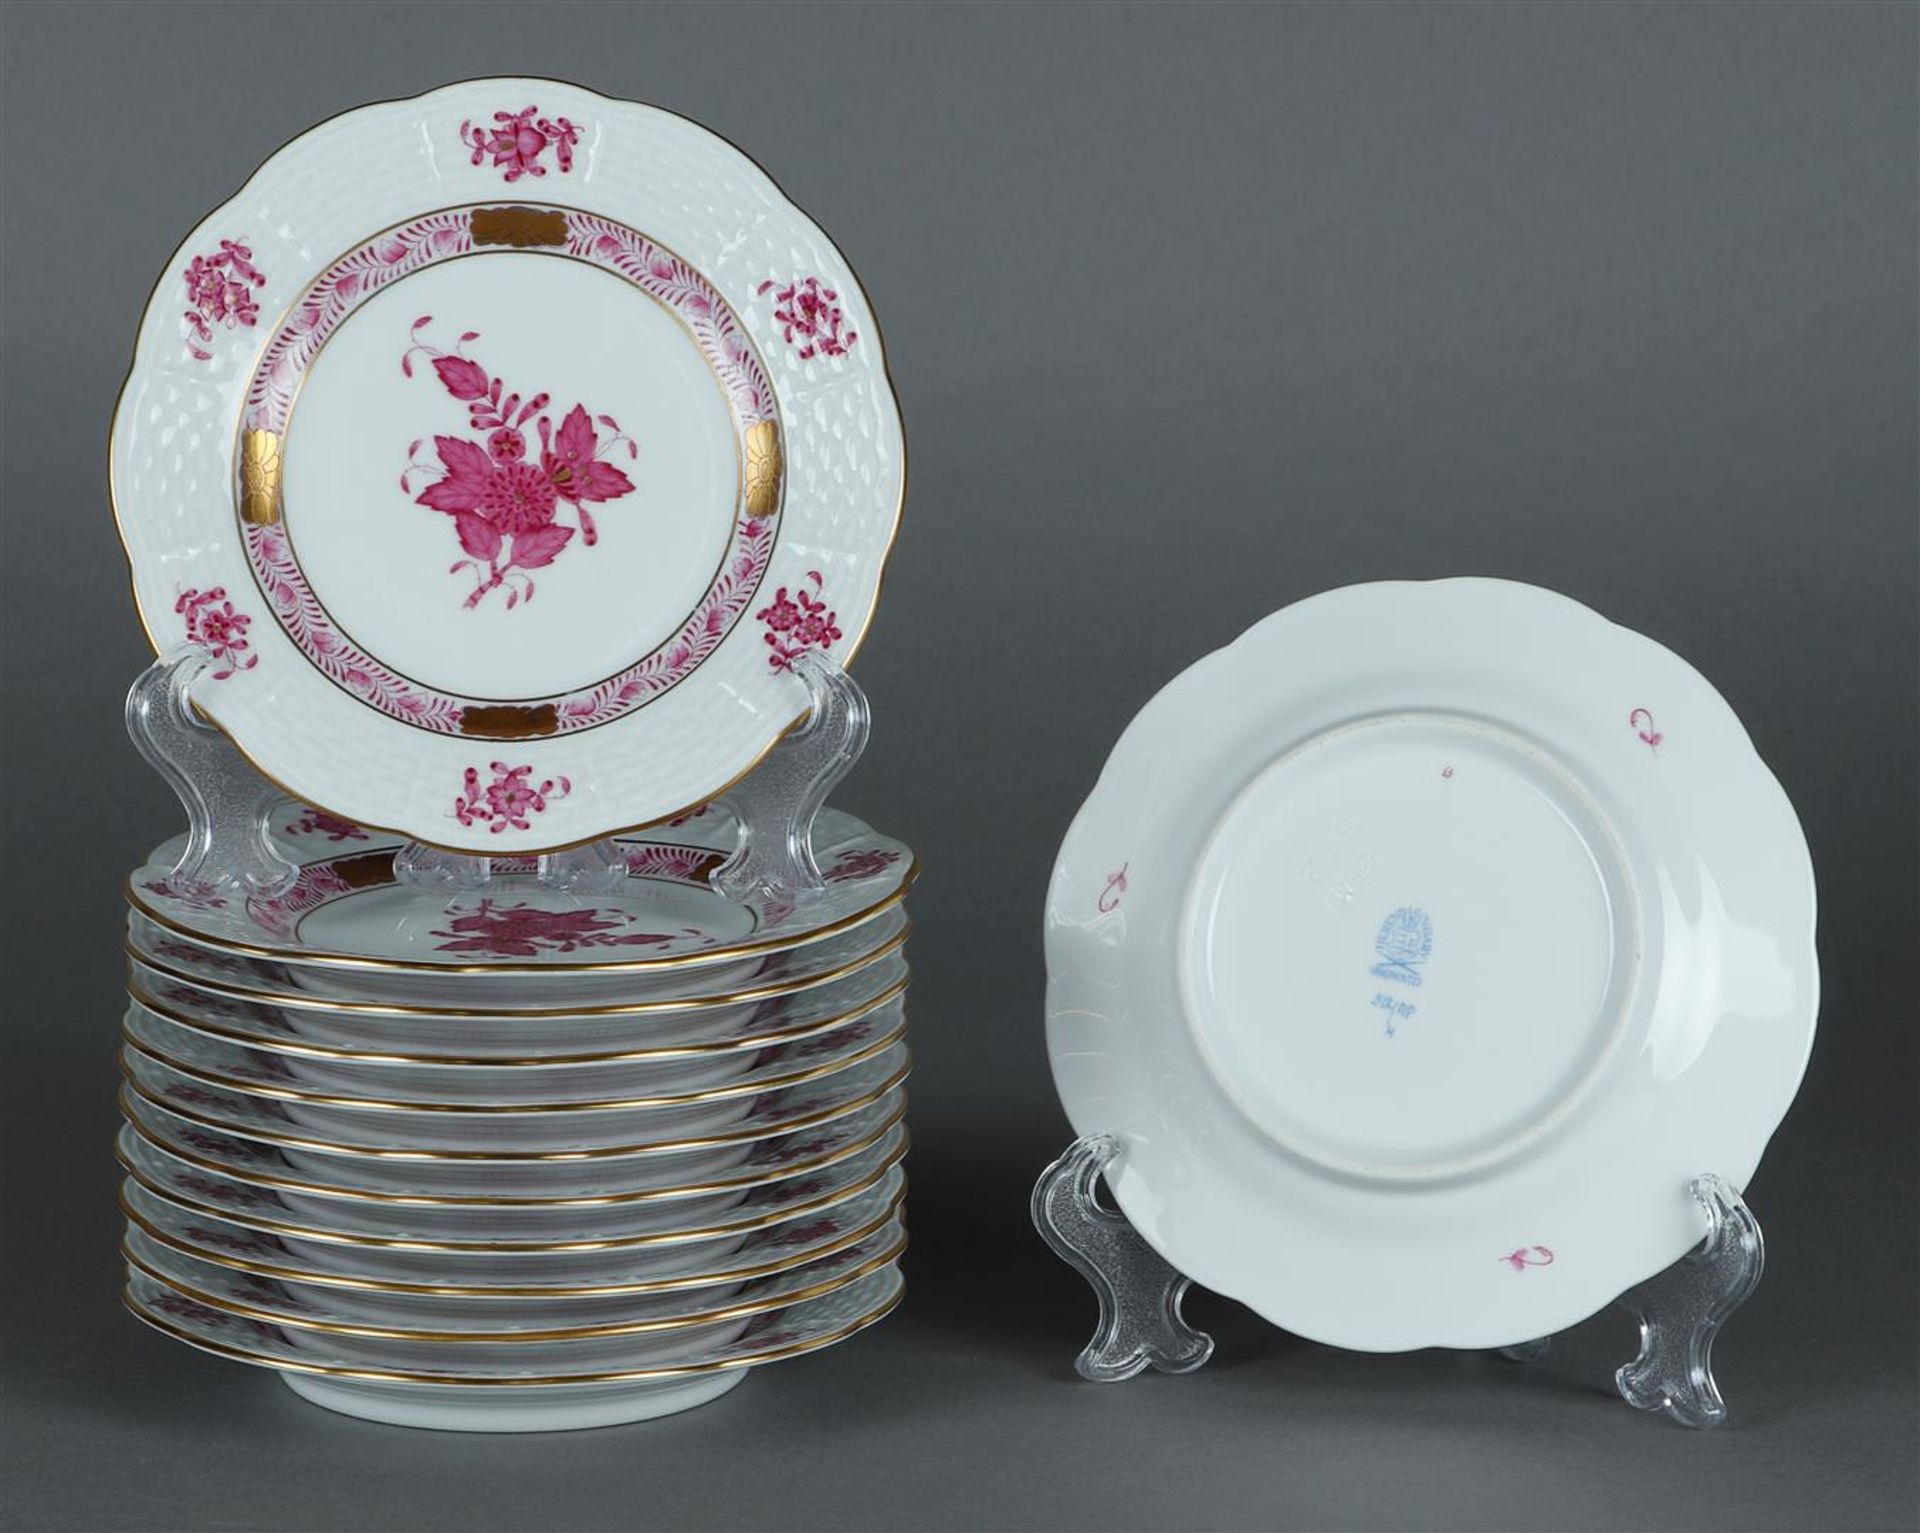 A set of 12 porcelain pie plates with apponyi purple decor. Herend, Hungary.